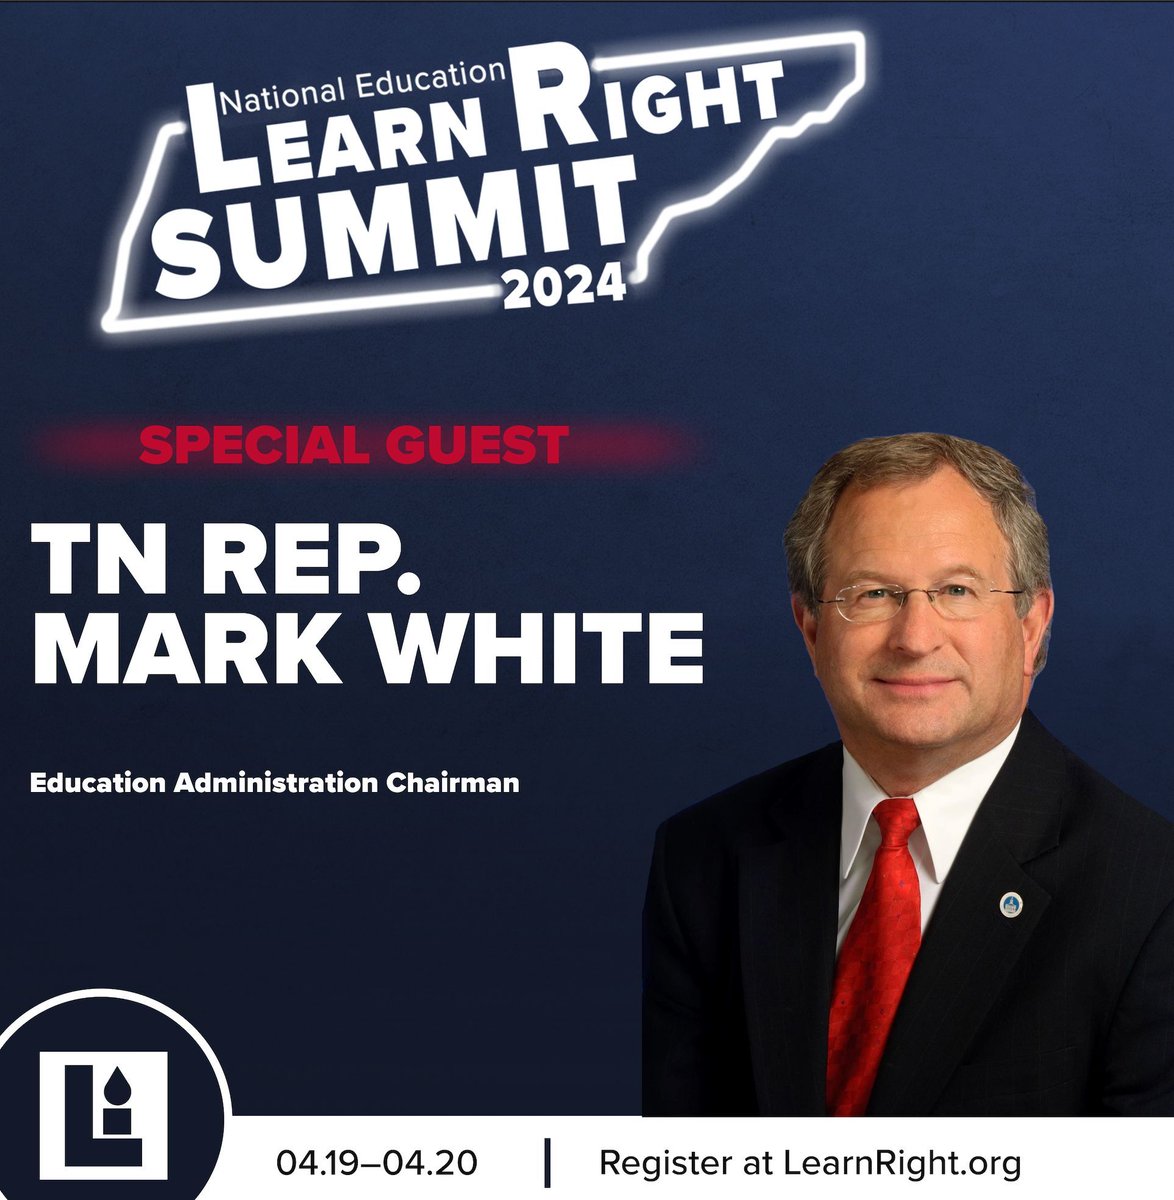 Excited to welcome Tennessee Representative and Education Administration Chairman @repmarkwhitetn to the #learnright24 Summit in Nashville!

Register NOW at learnright.org

 #learnright #lr24 #nashville #tn #education #learnleadwin #learnright #school #schoolboard #usa